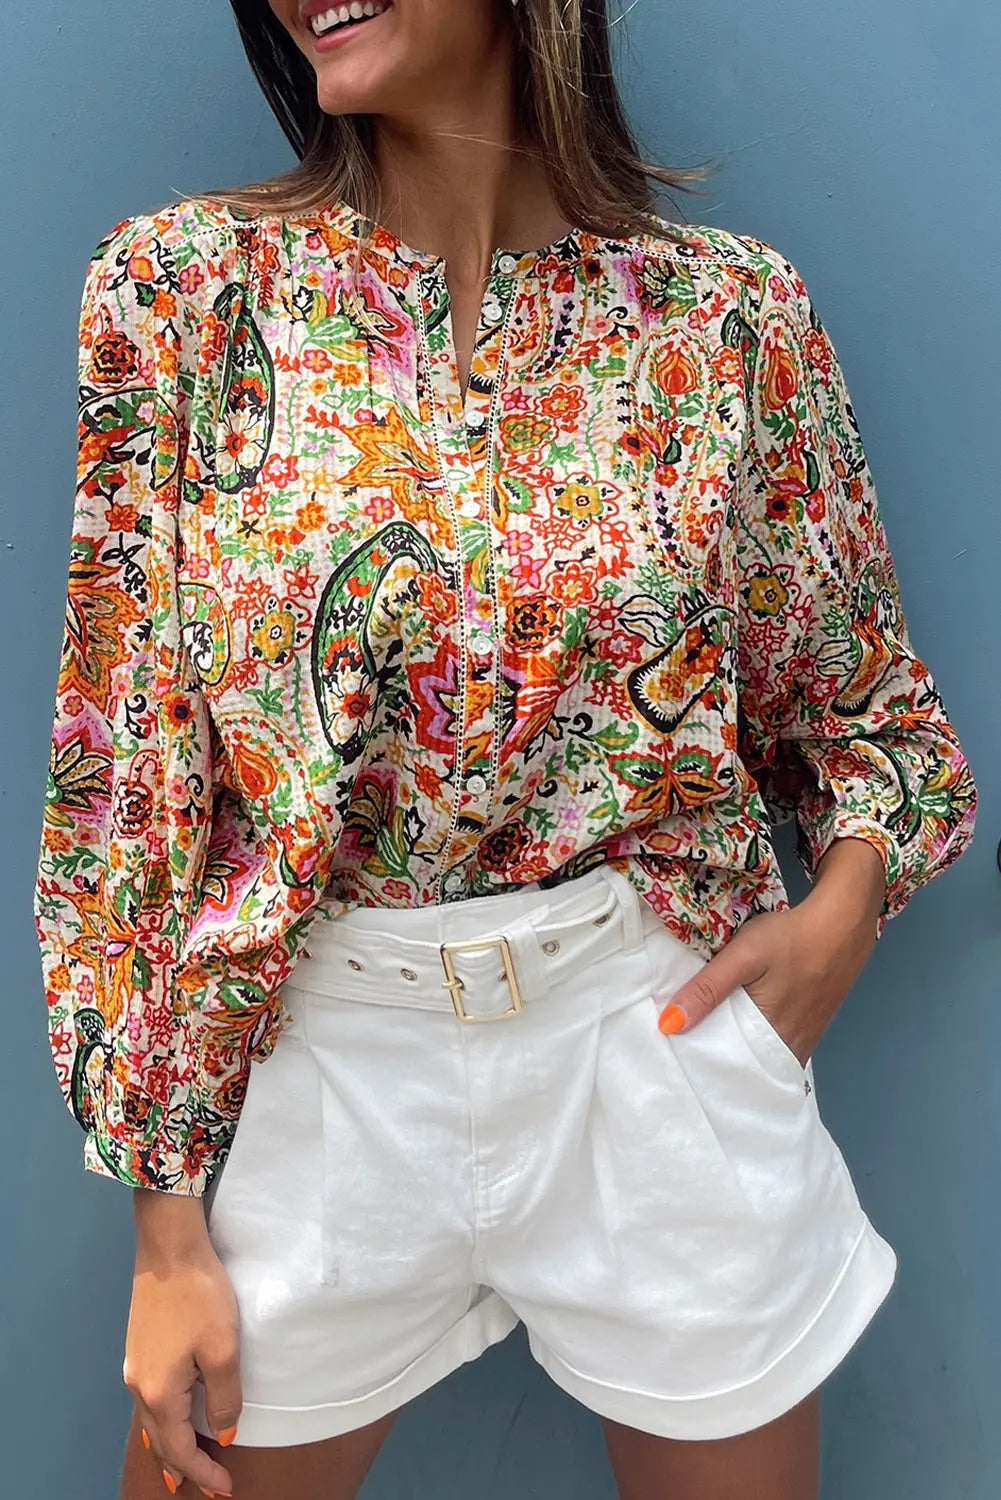 Multicolour floral print lace splicing button up puff sleeve shirt - s / 100% cotton - blouses & shirts